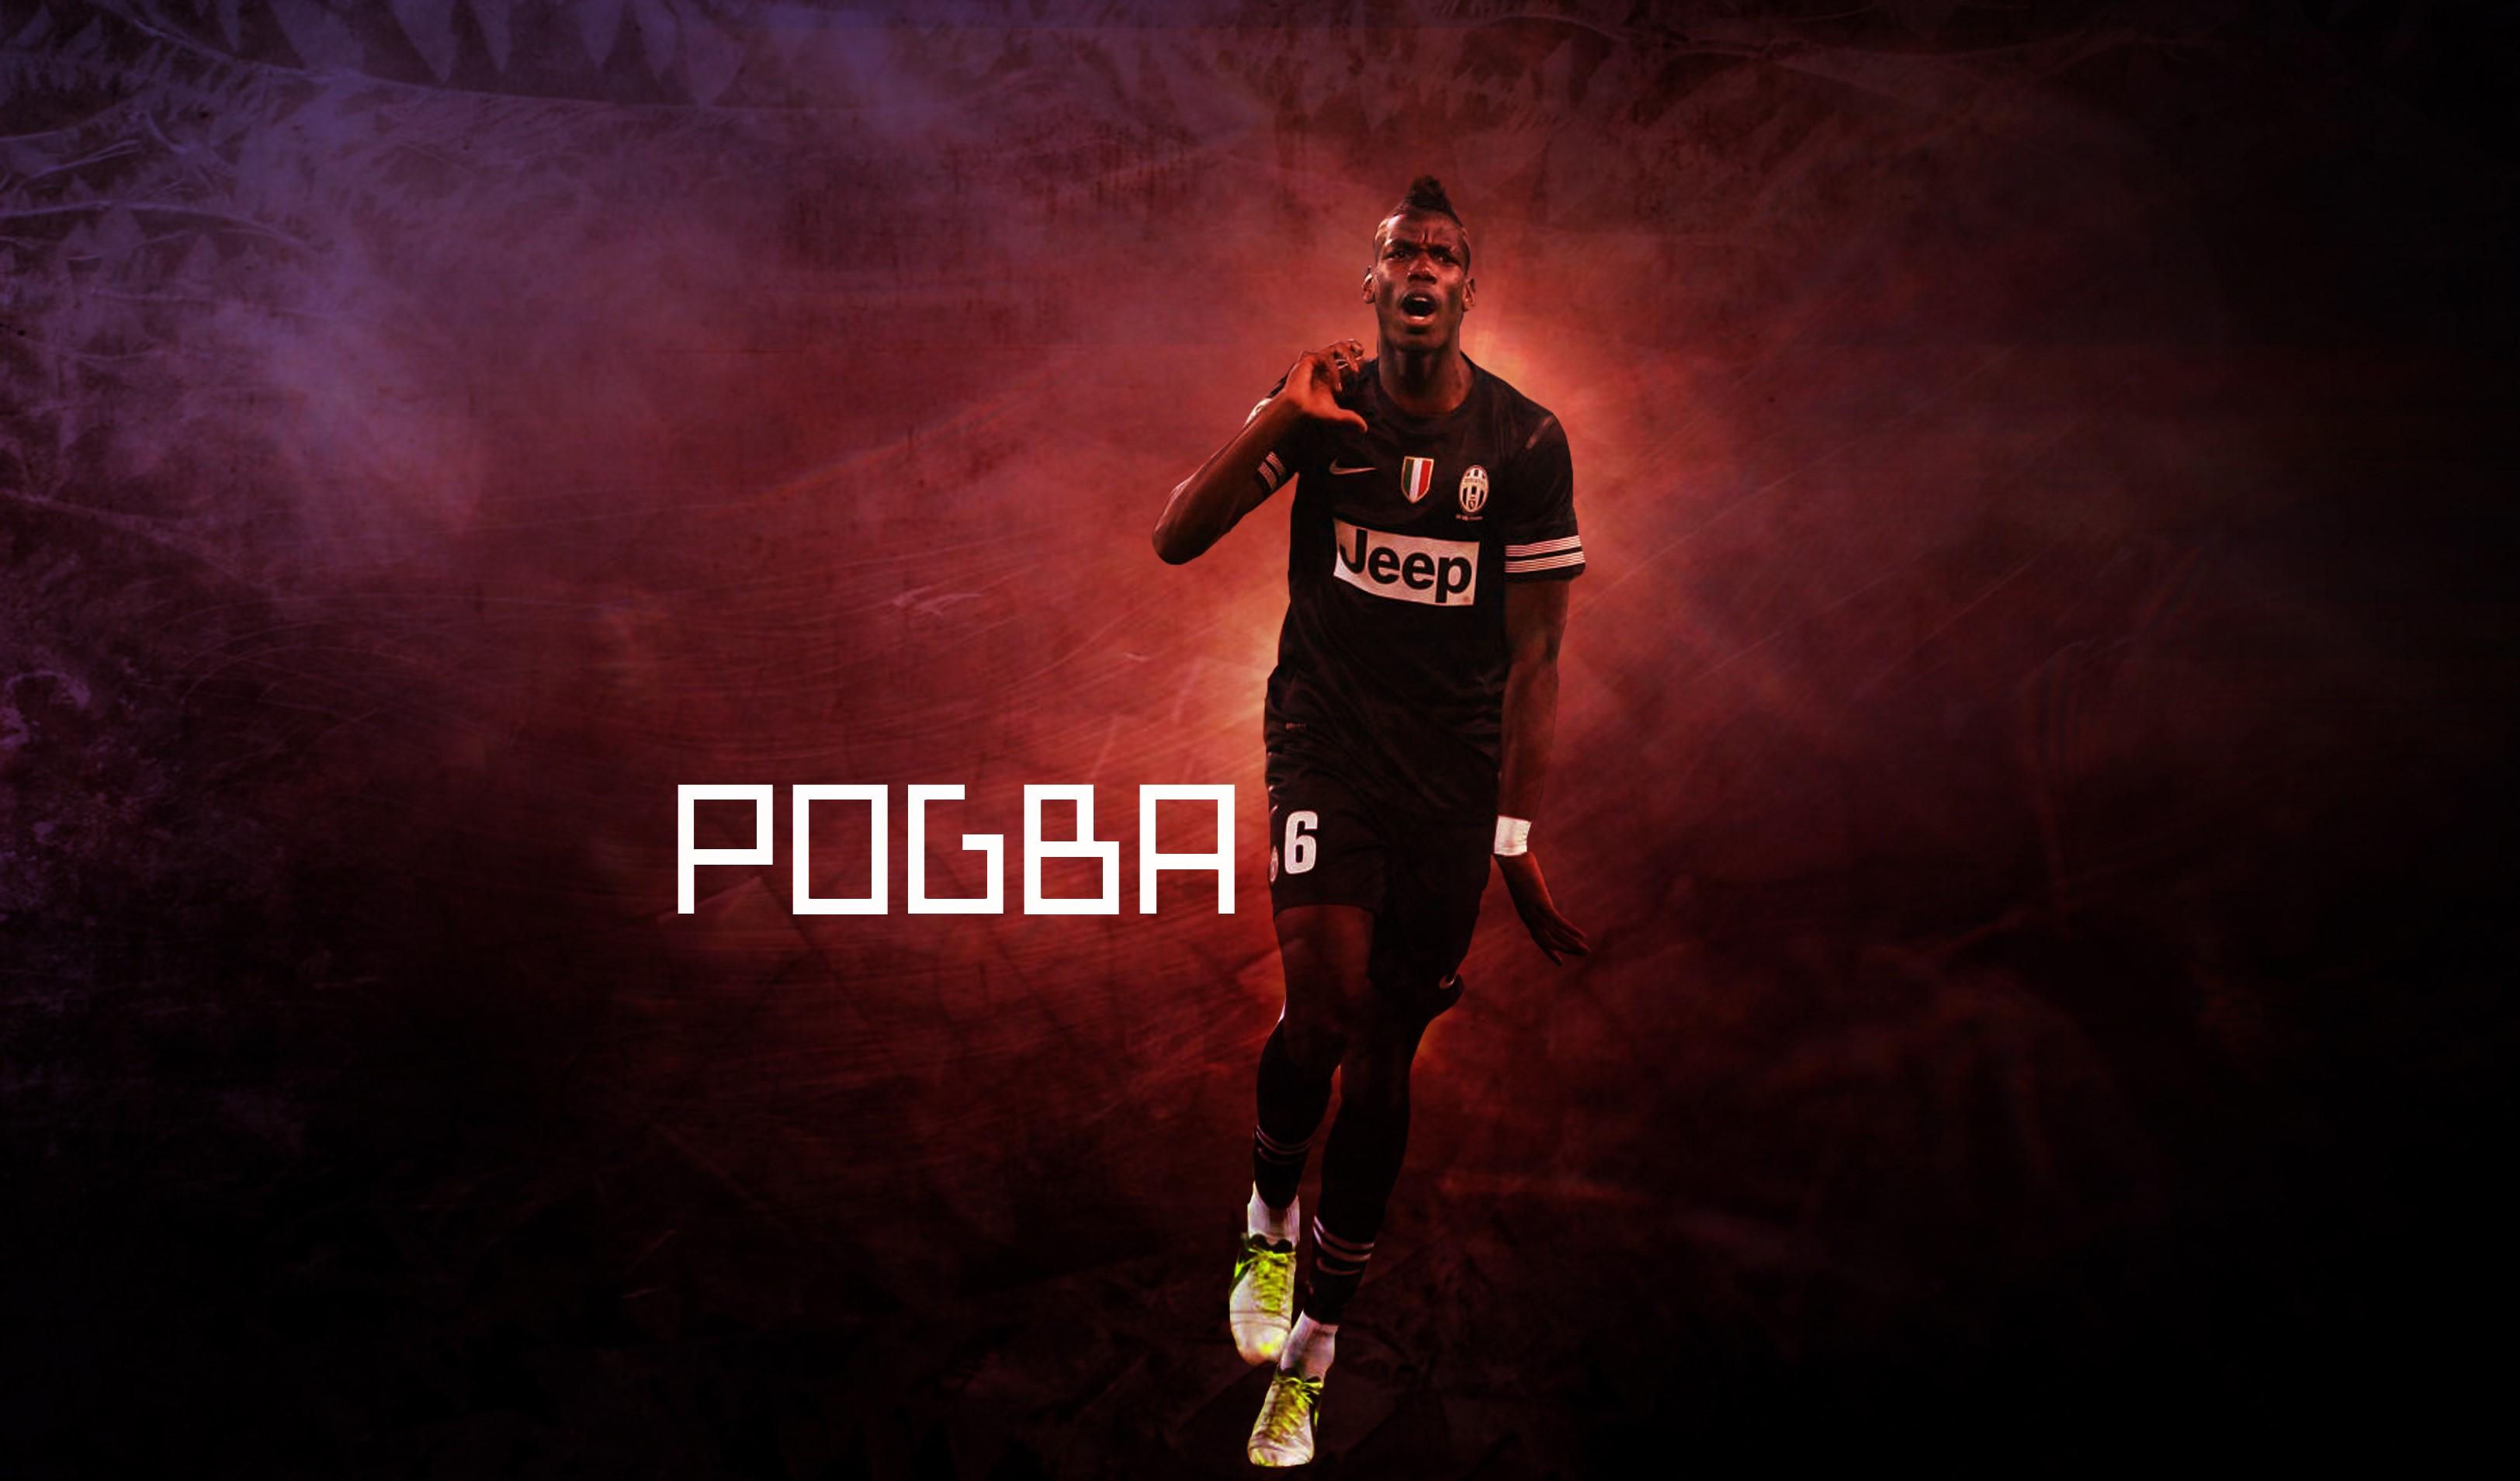 Paul Pogba Wallpaper, image collections of wallpaper